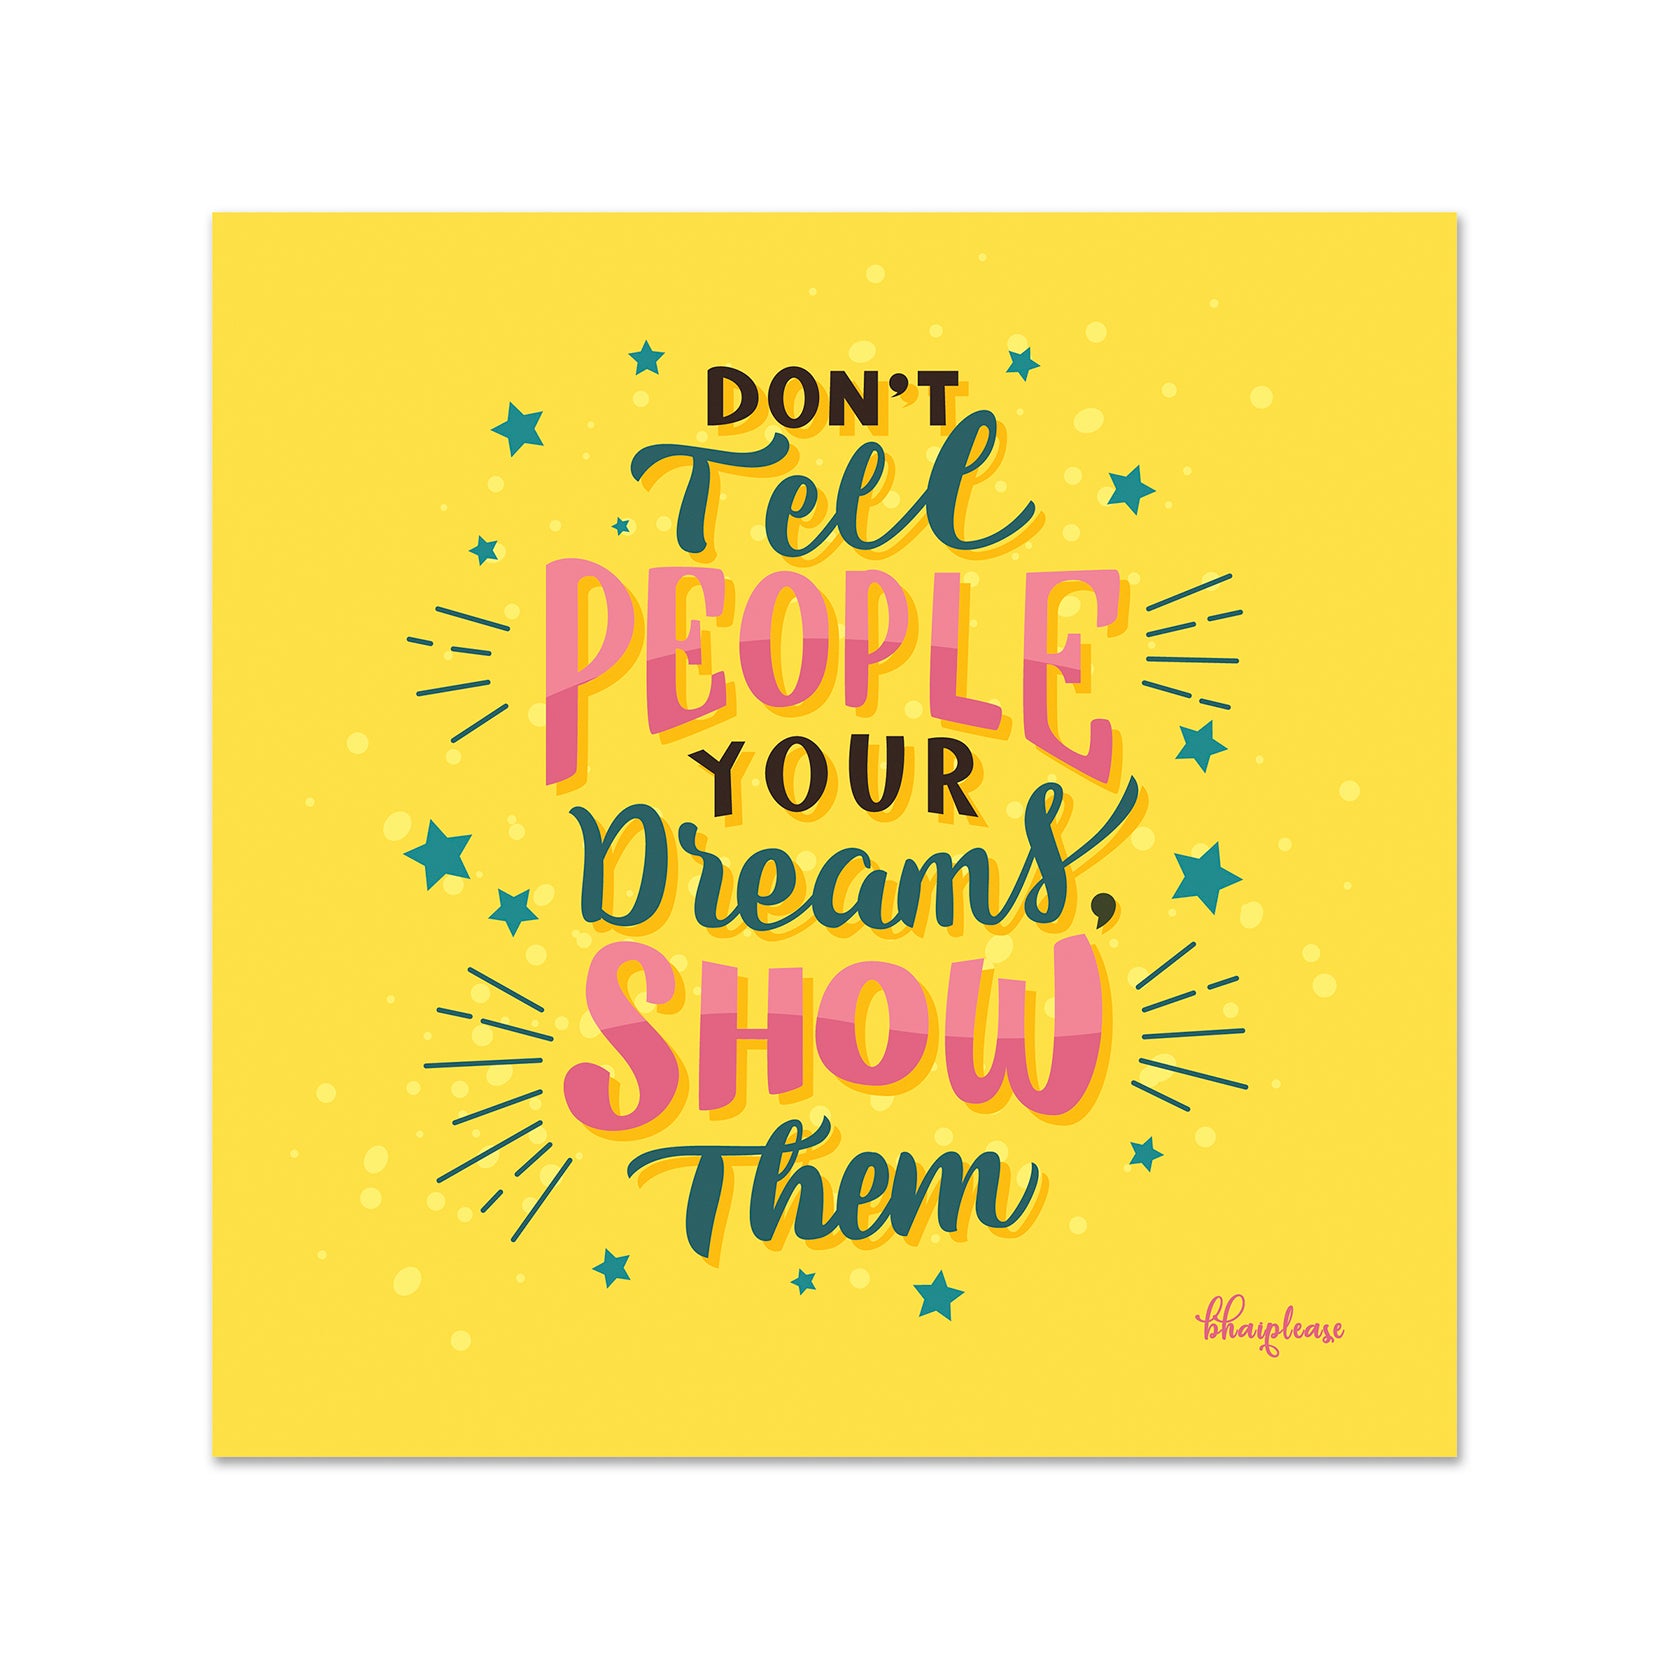 Don't Tell People Your Dreams Show Them Wooden Fridge / Refrigerator Magnet